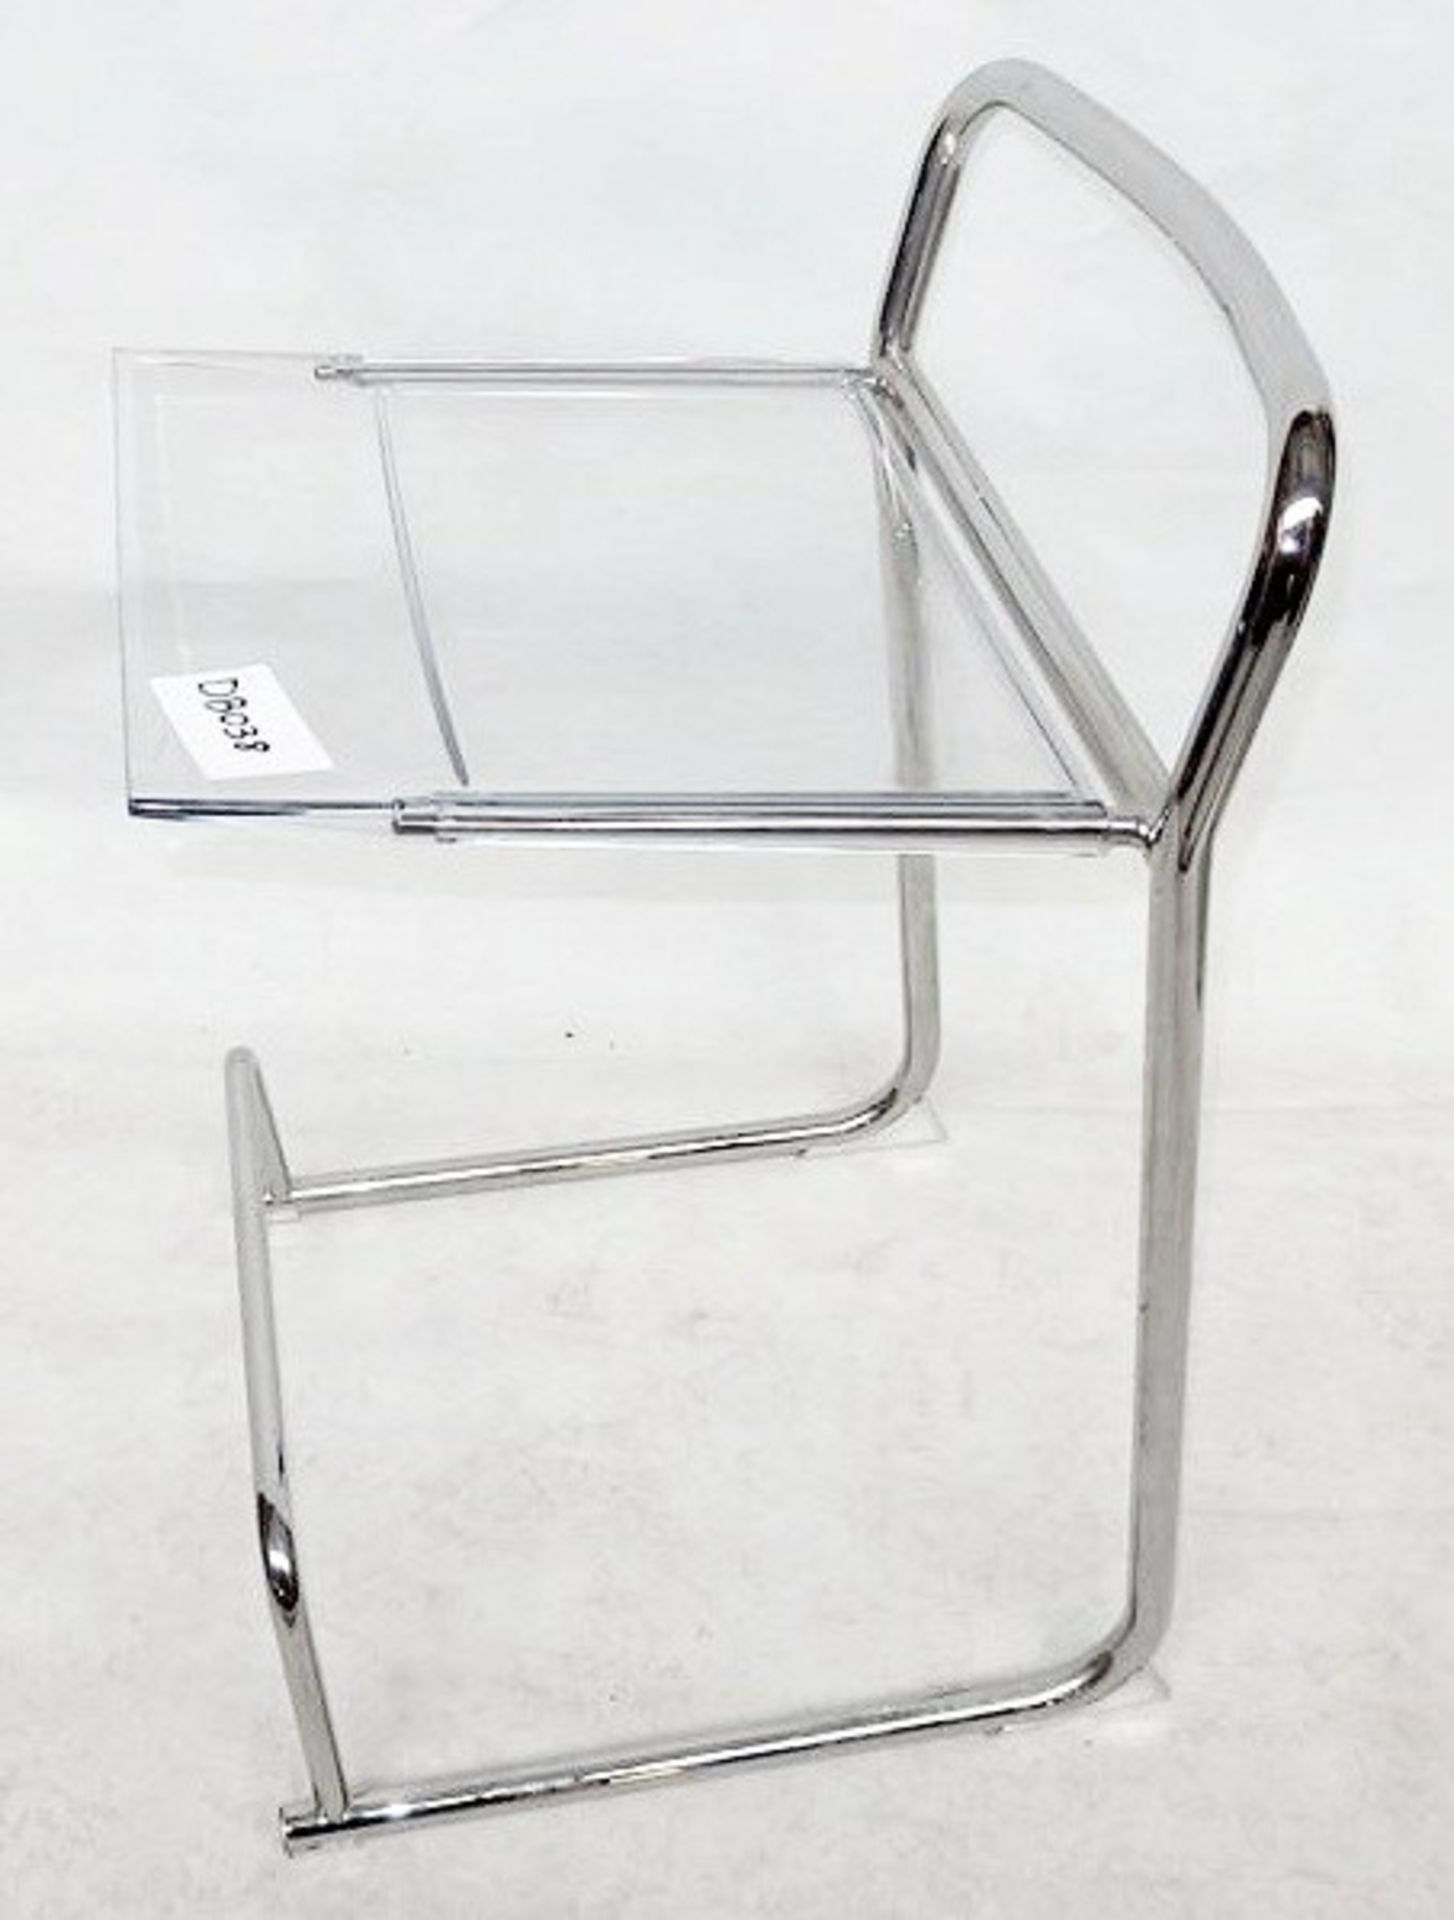 1 x Modern Designer Chair - Features A Sturdy Metal Tube Frame and Clear Perspex Seat -